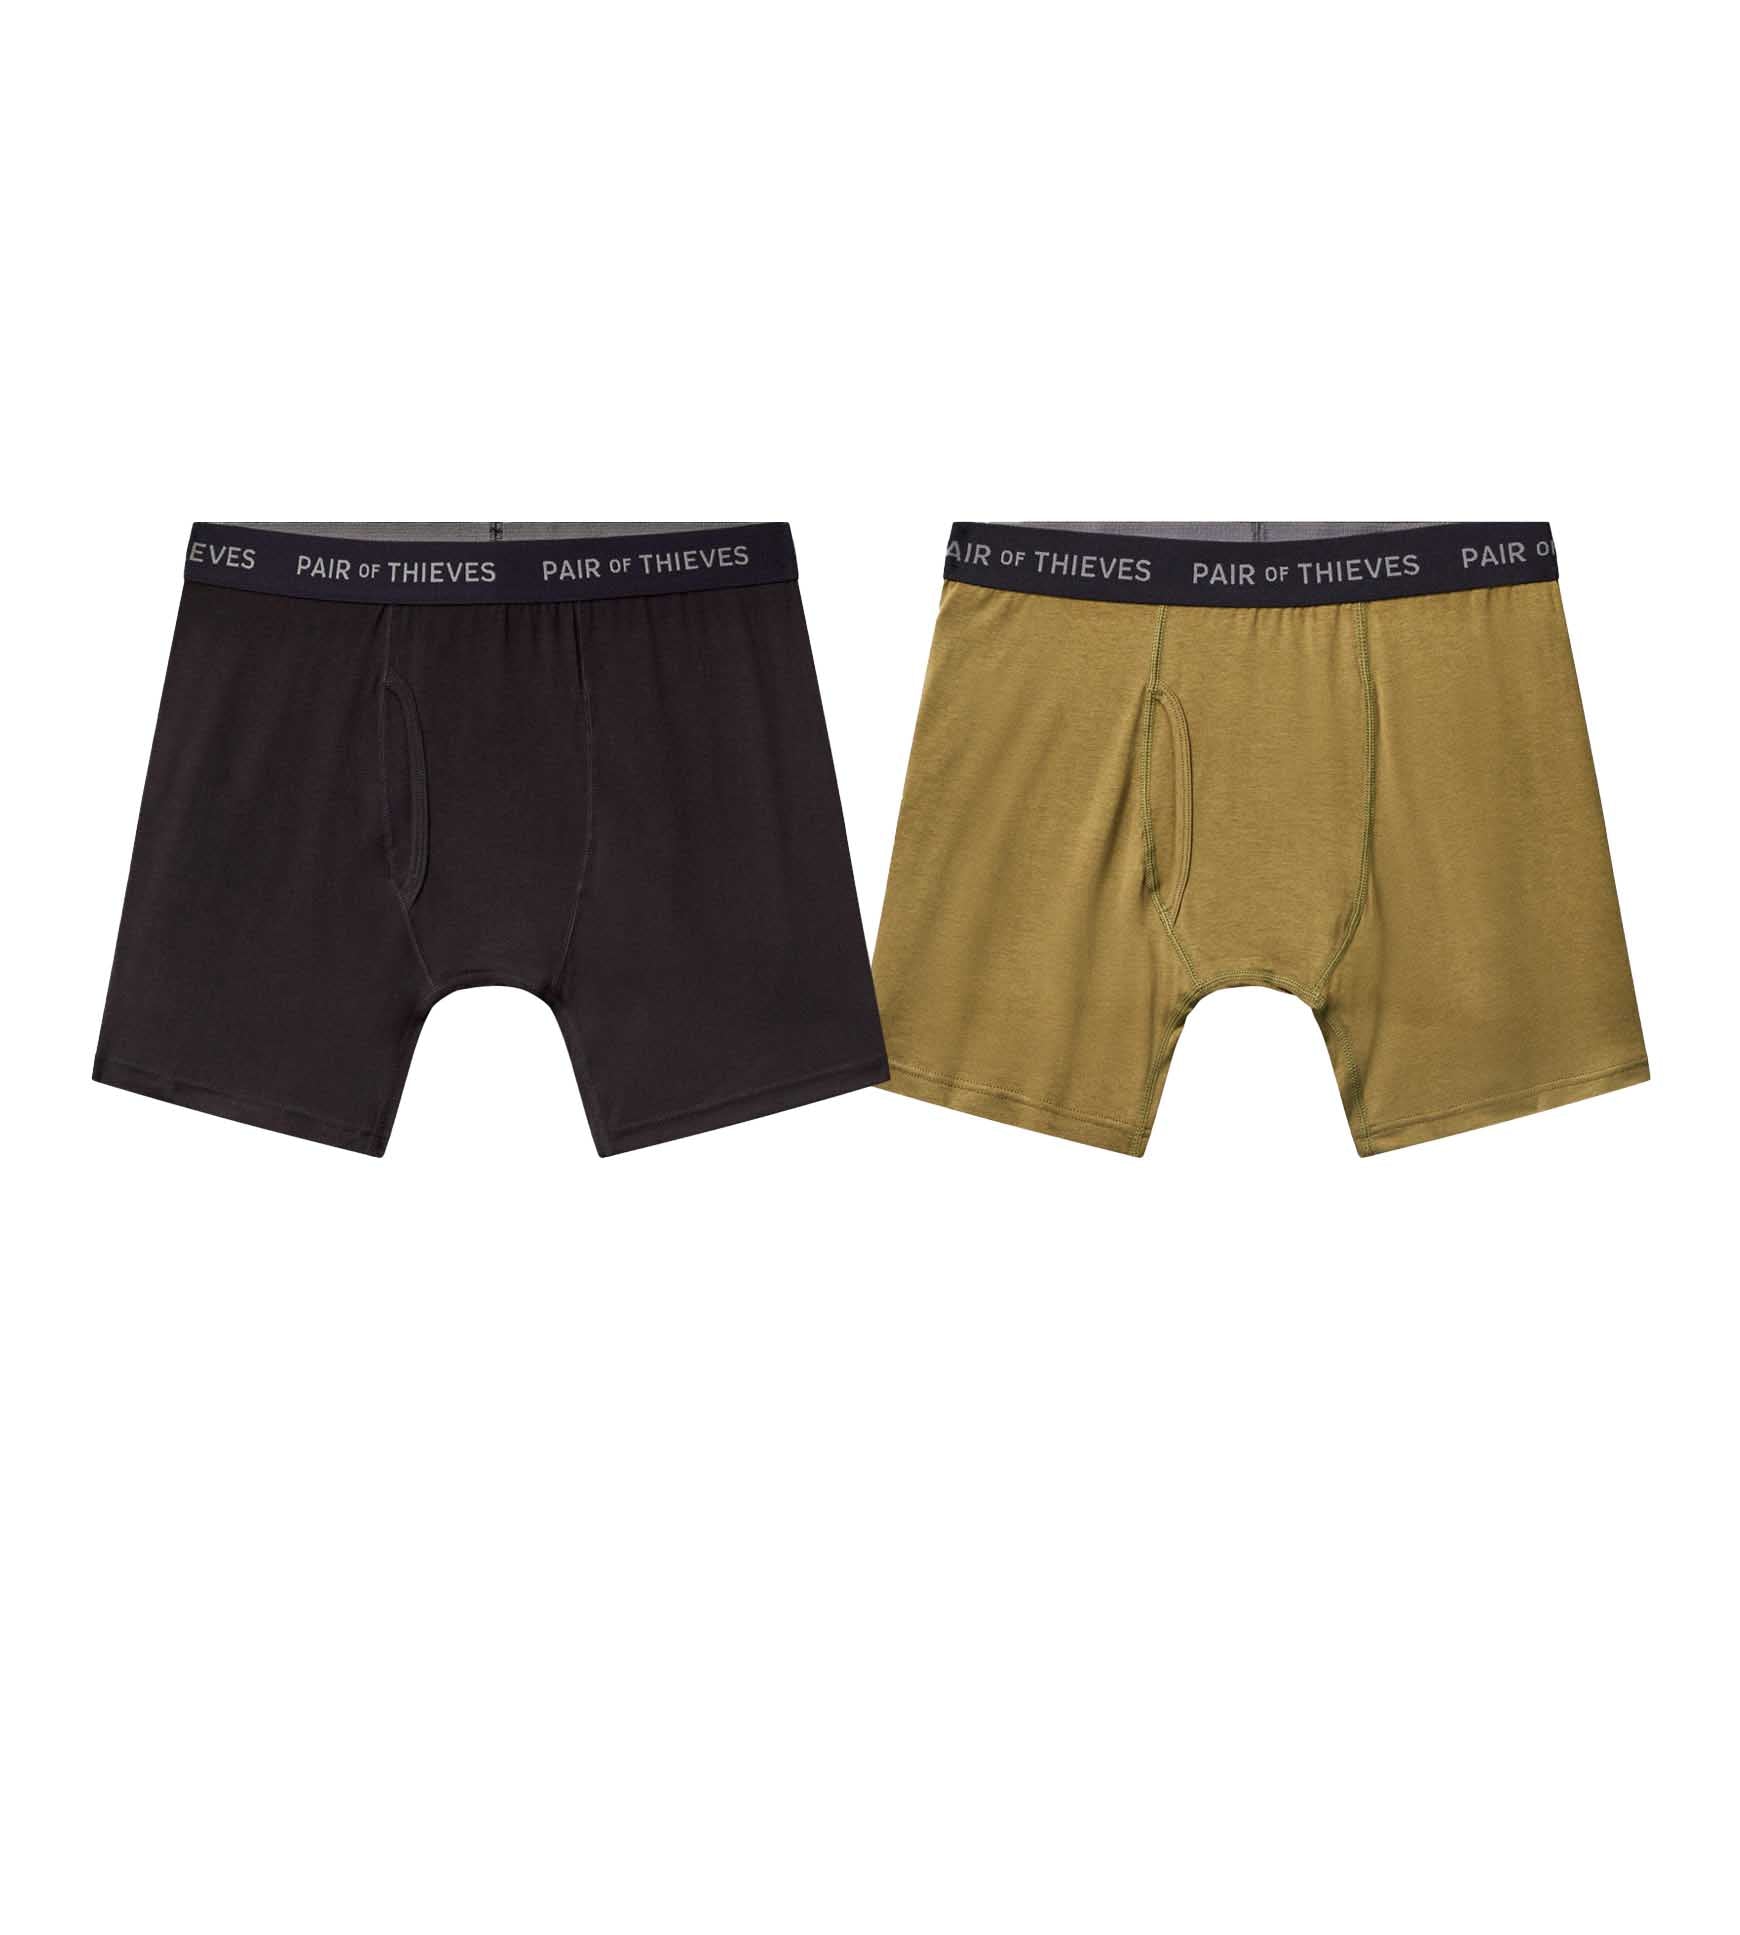 SuperSoft Boxer Briefs 2 Pack - Black/Seaweed - Pair of Thieves